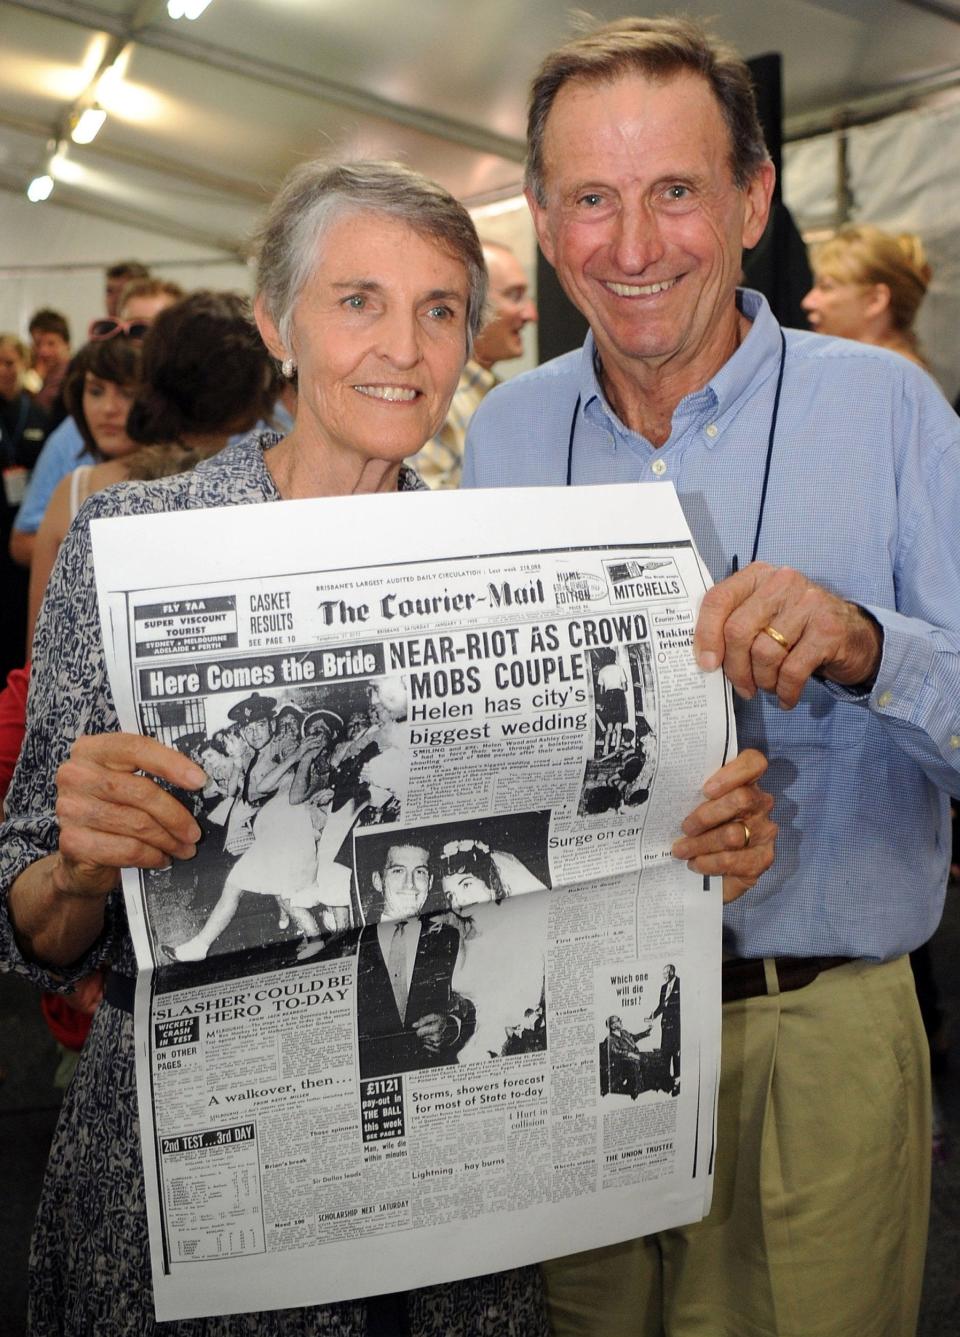 Ashley Cooper and his wife Helen, a former Miss Australia, celebrate their 50th wedding anniversary in 2009 -  David Hardenberg/Getty Images